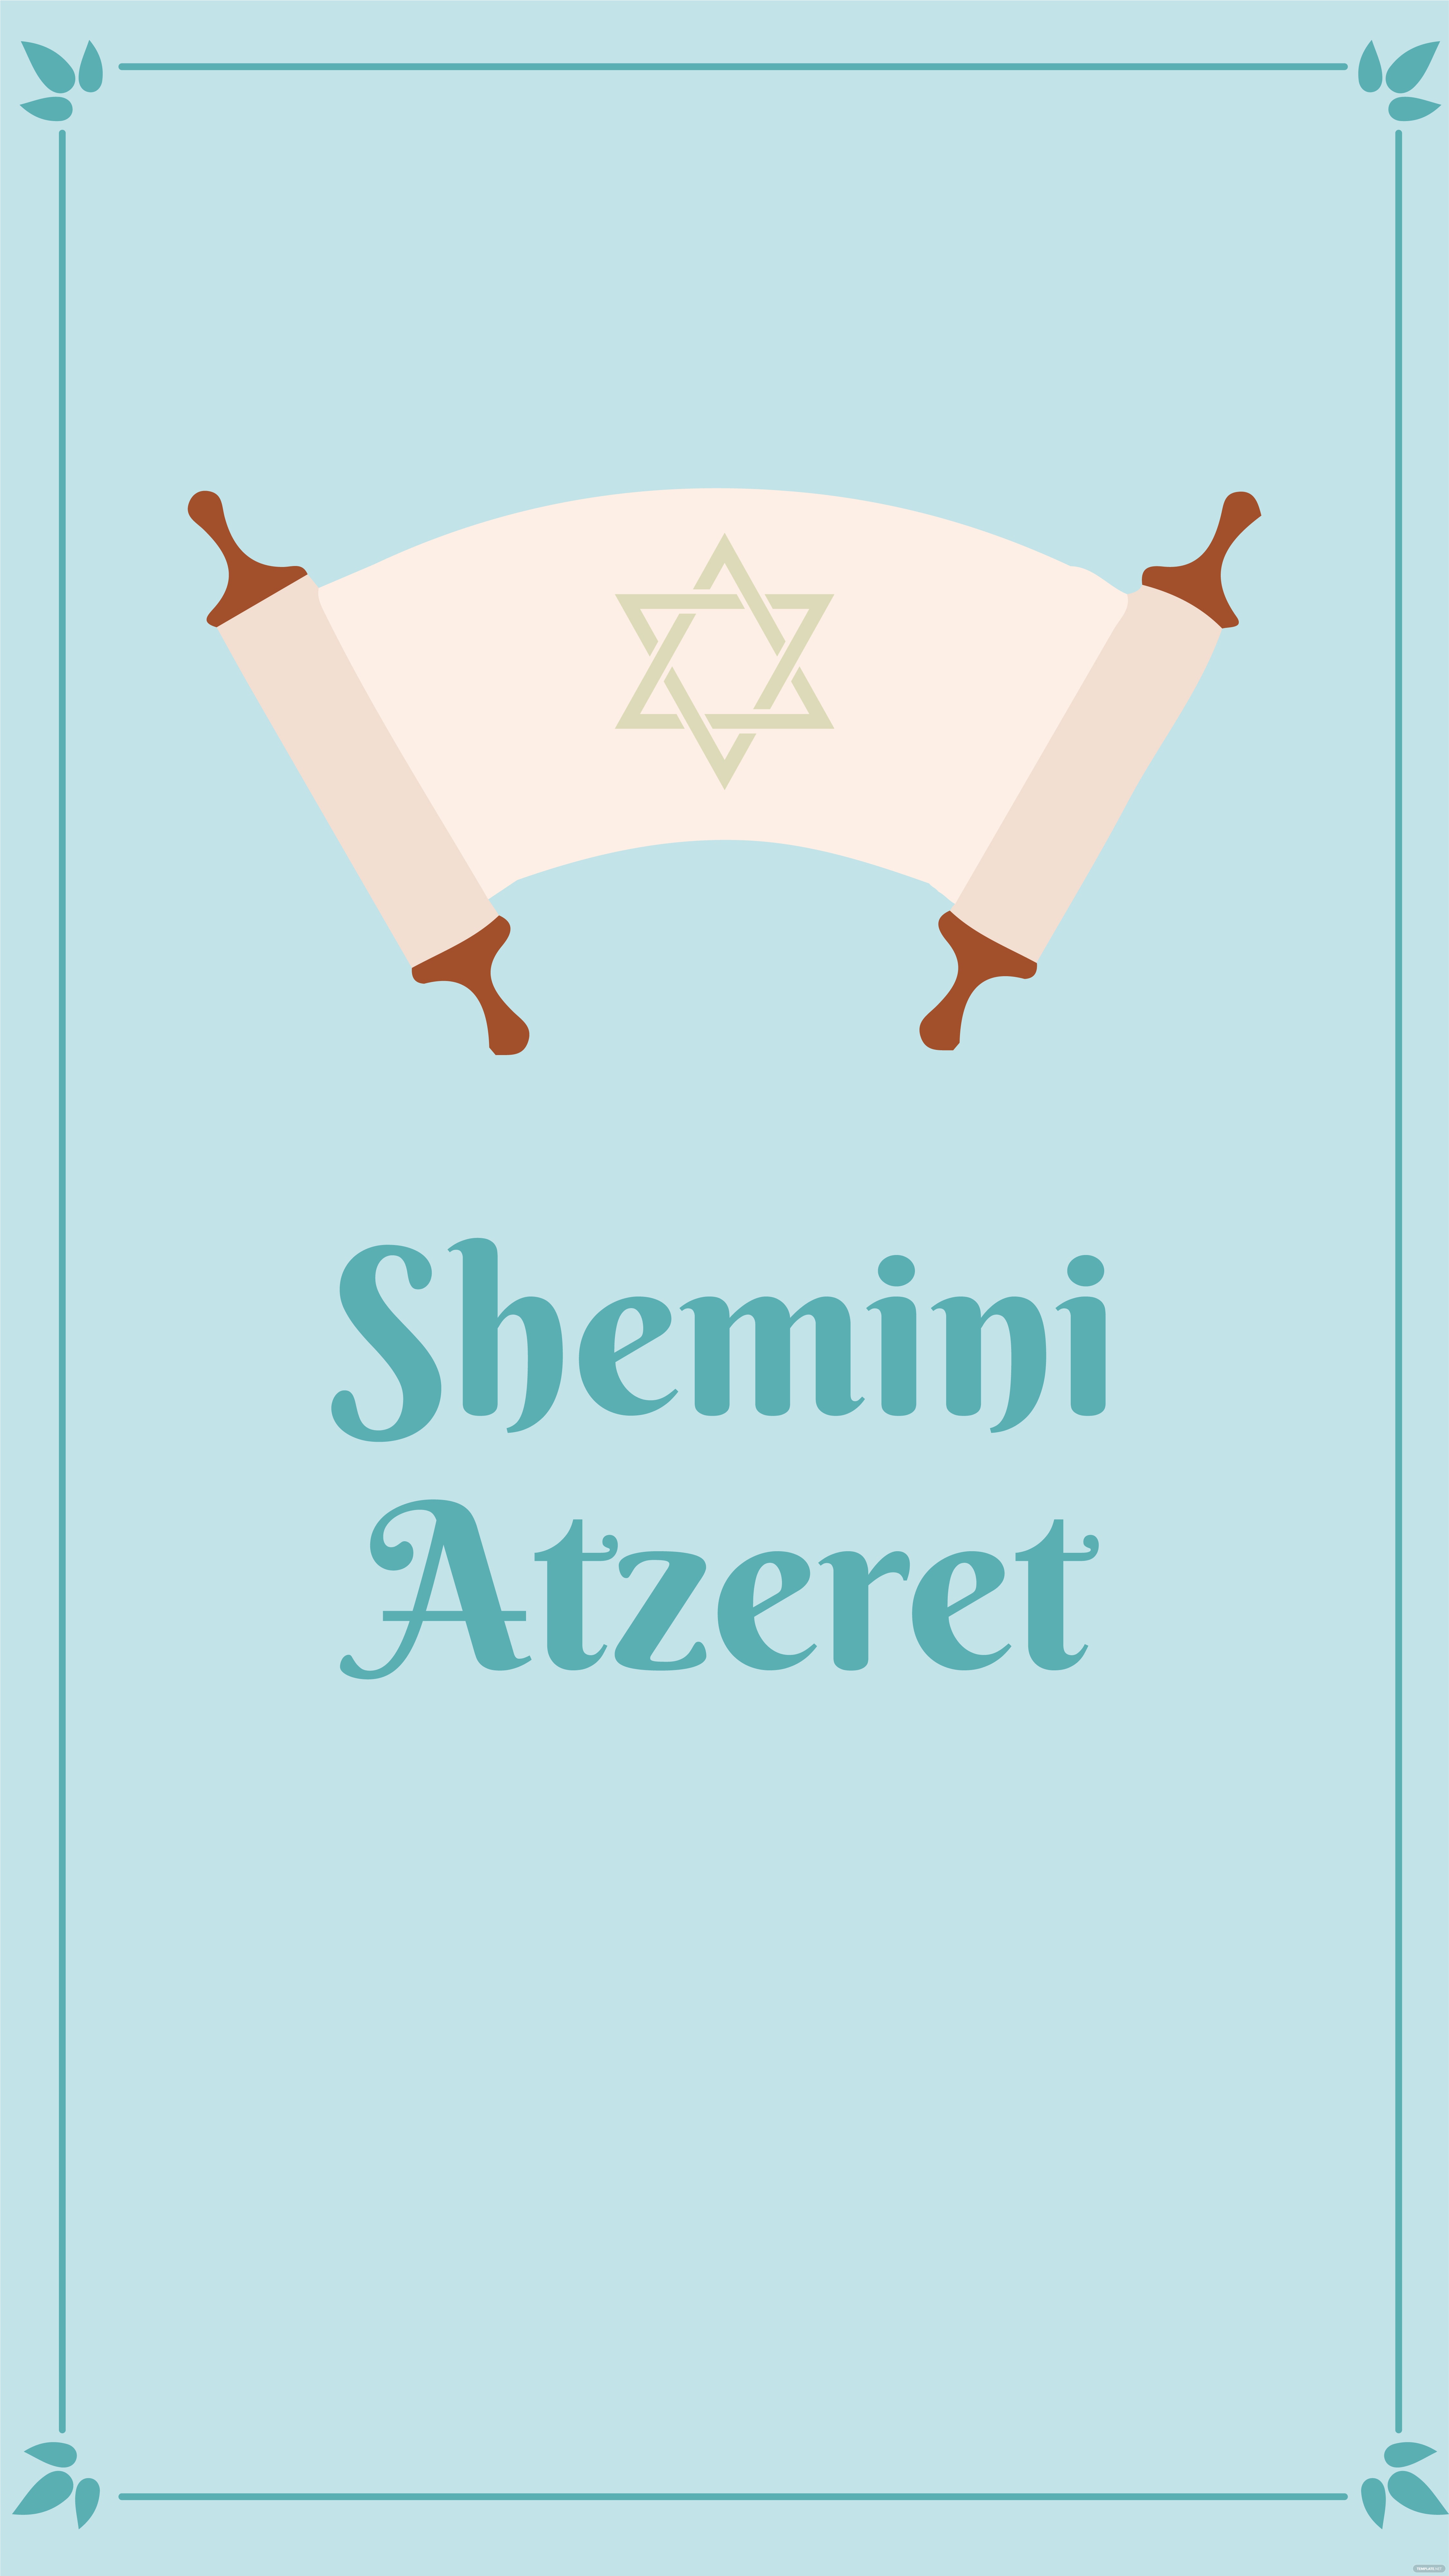 shemini atzeret iphone background ideas and examples